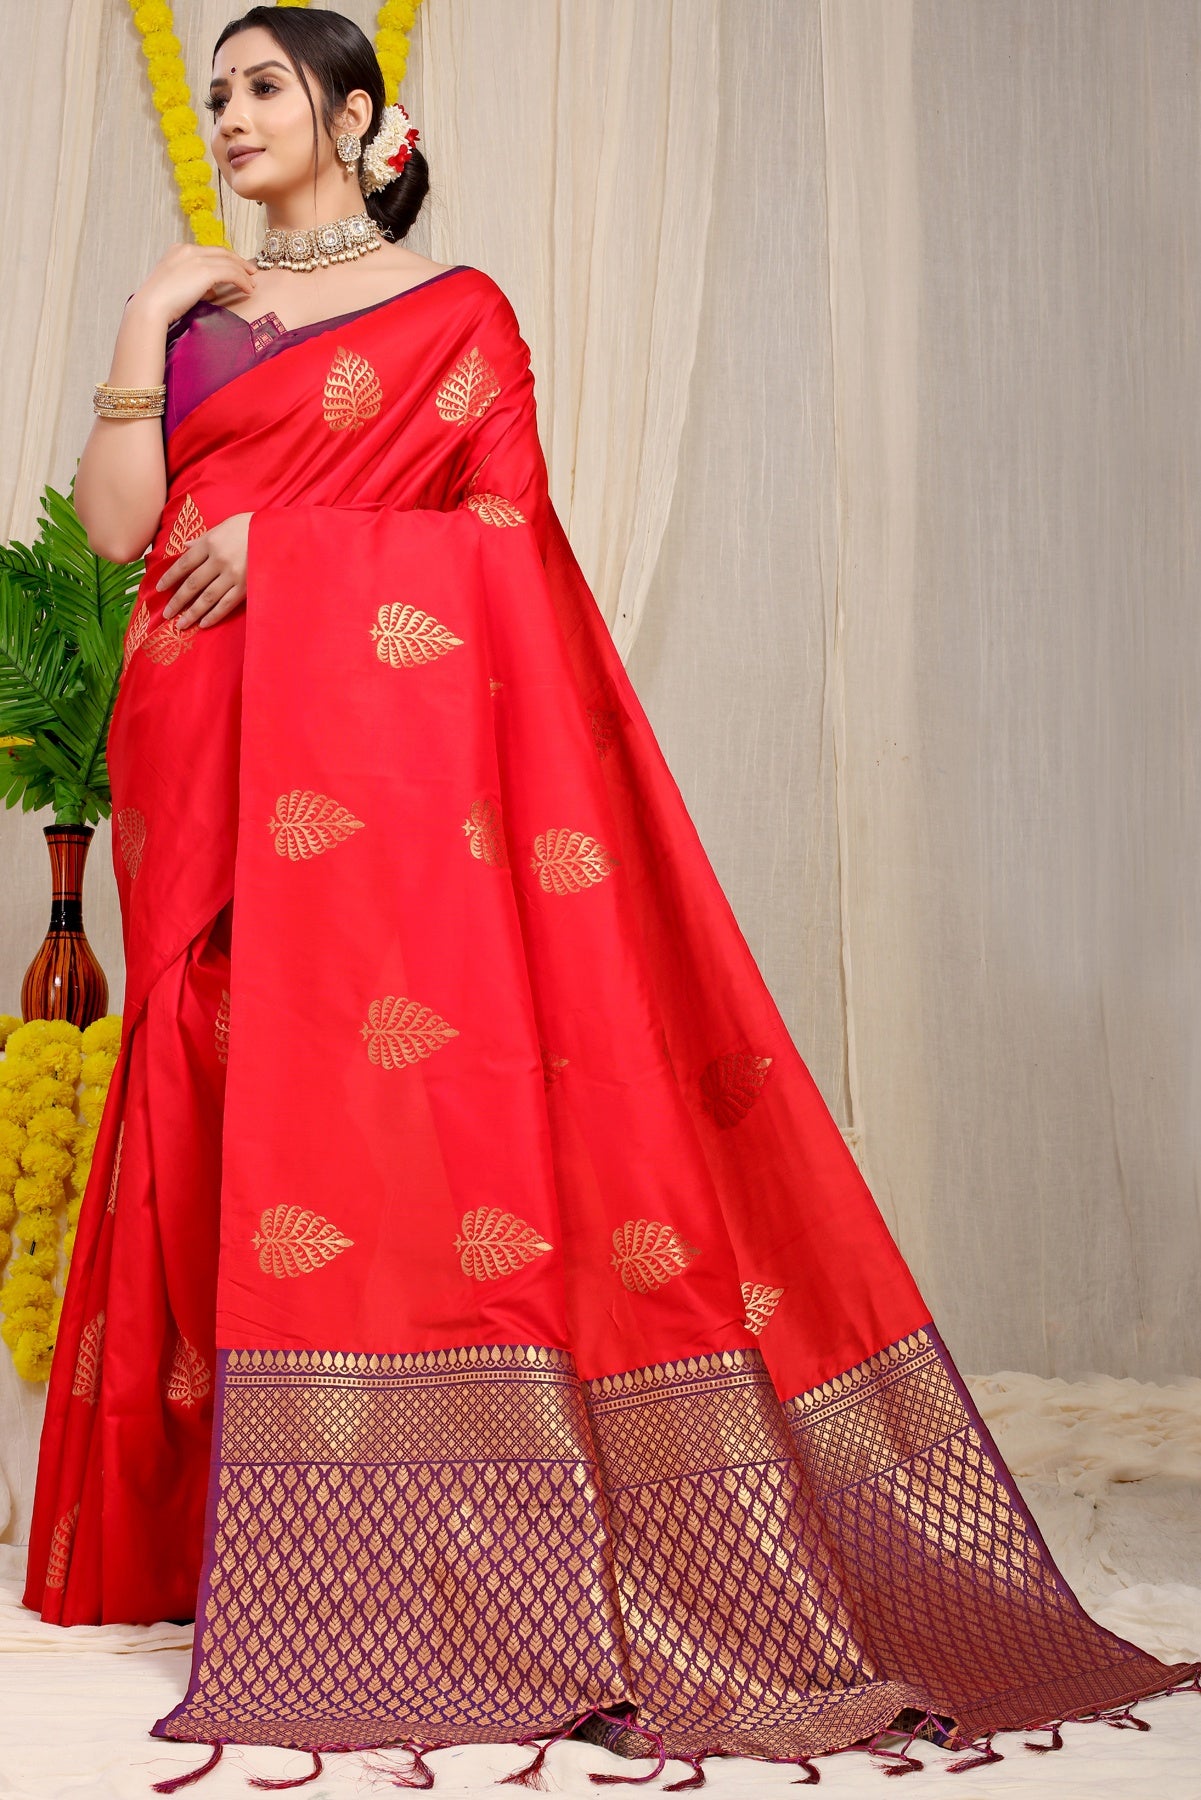 Fancifull Red Soft Banarasi Silk Saree With Lissome Blouse Piece